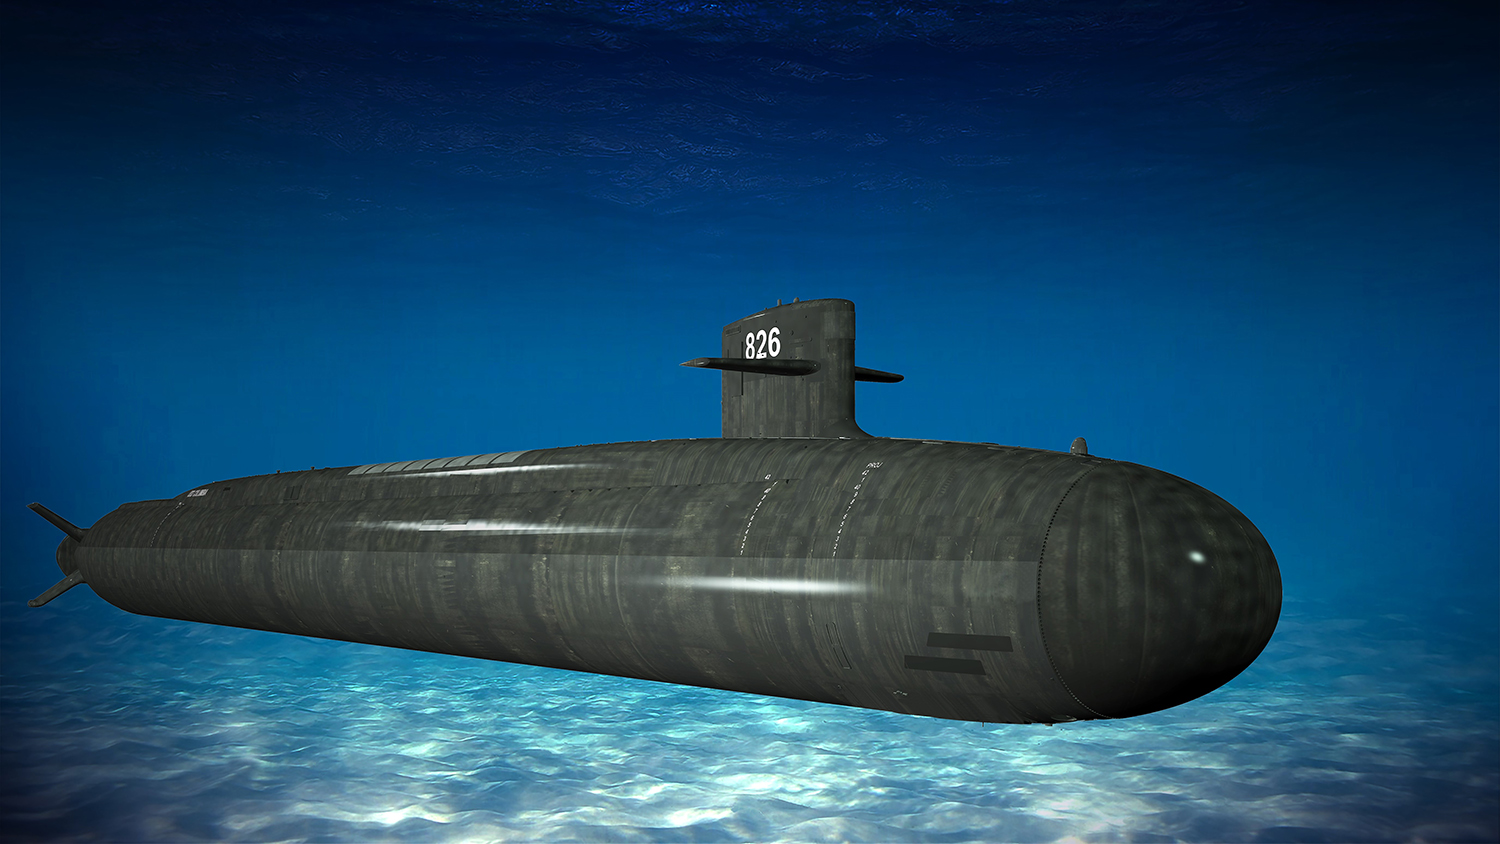 Artist rendering of a Columbia-class submarine underwater. Vessel is dark gray surrounded by a varying shade of blue to mimic water.